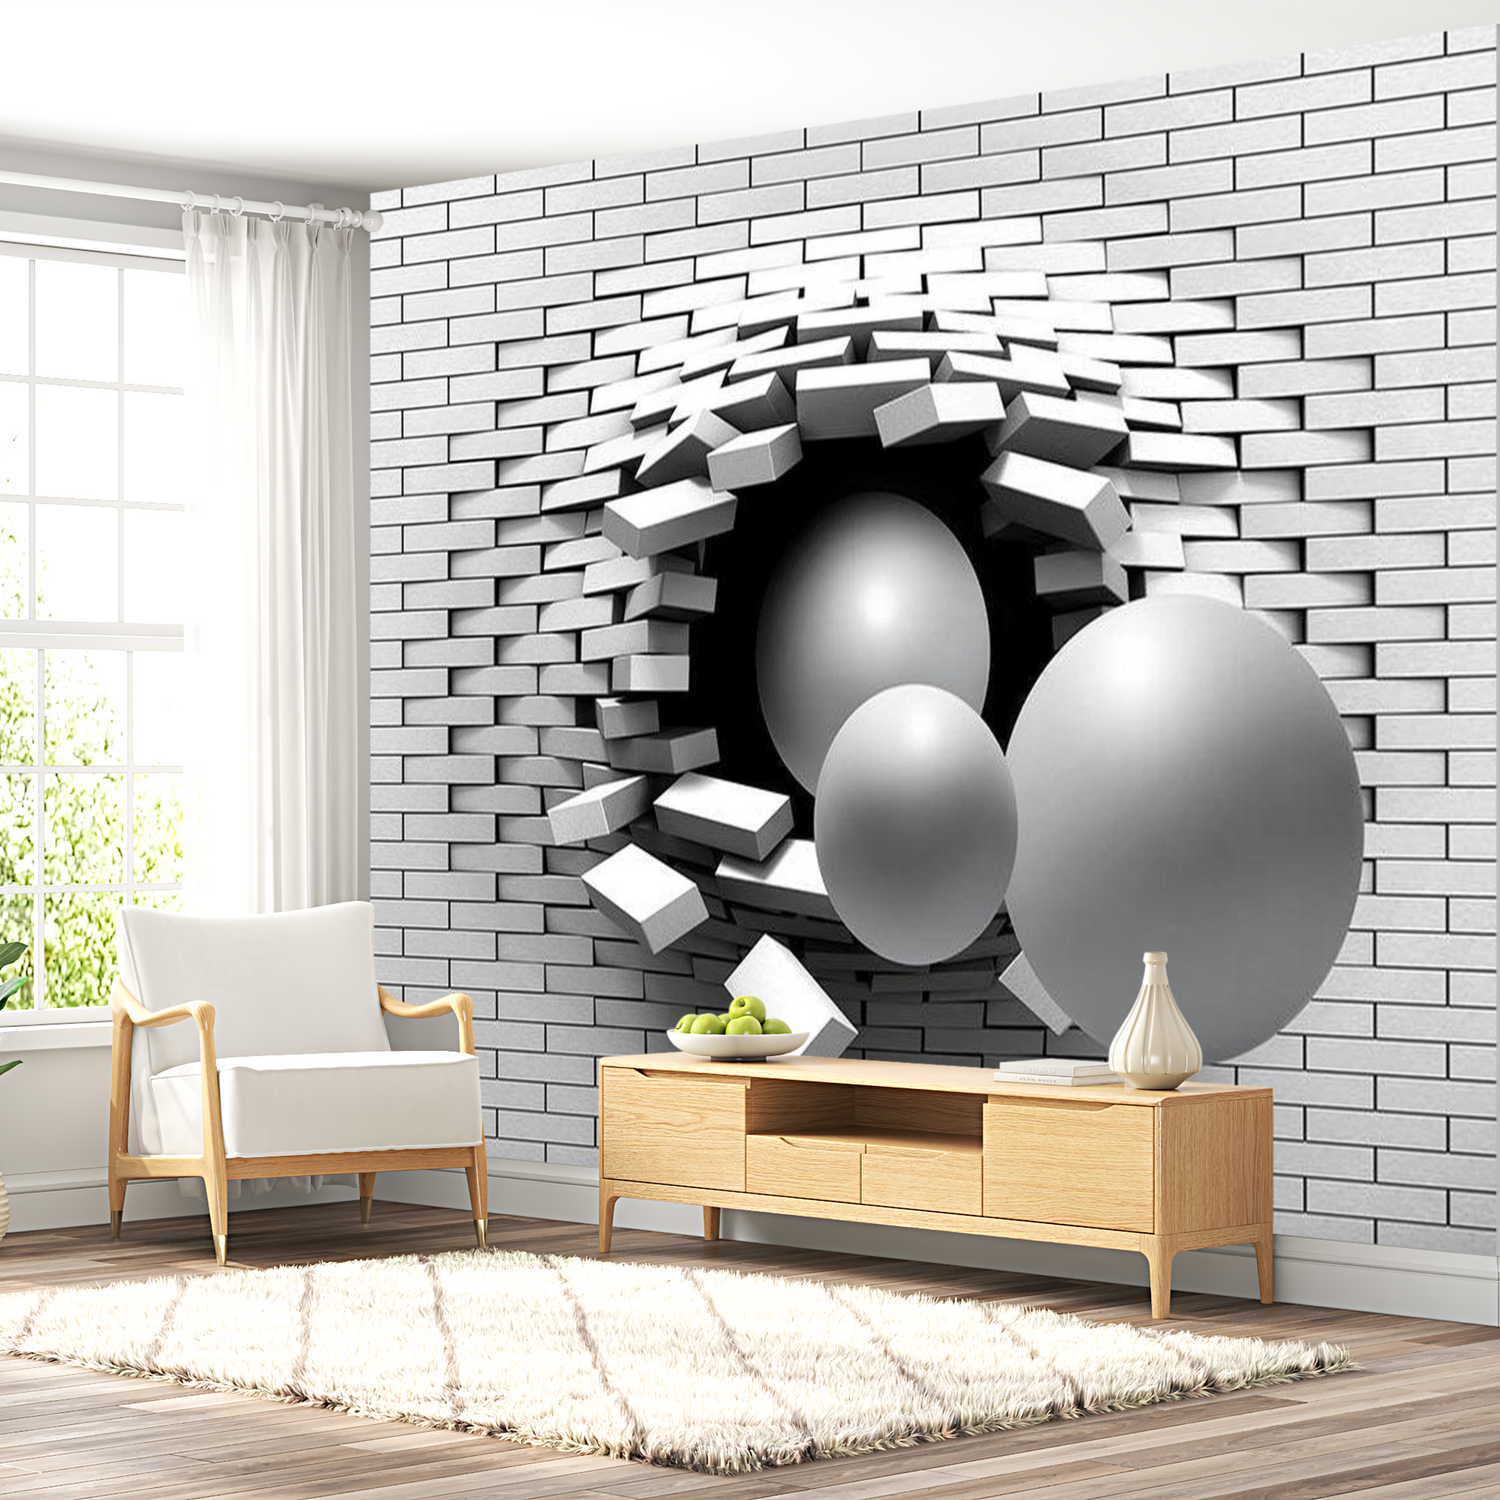 3D Illusion Wallpaper Wall Mural - Brick In The Wall 39"Wx27"H